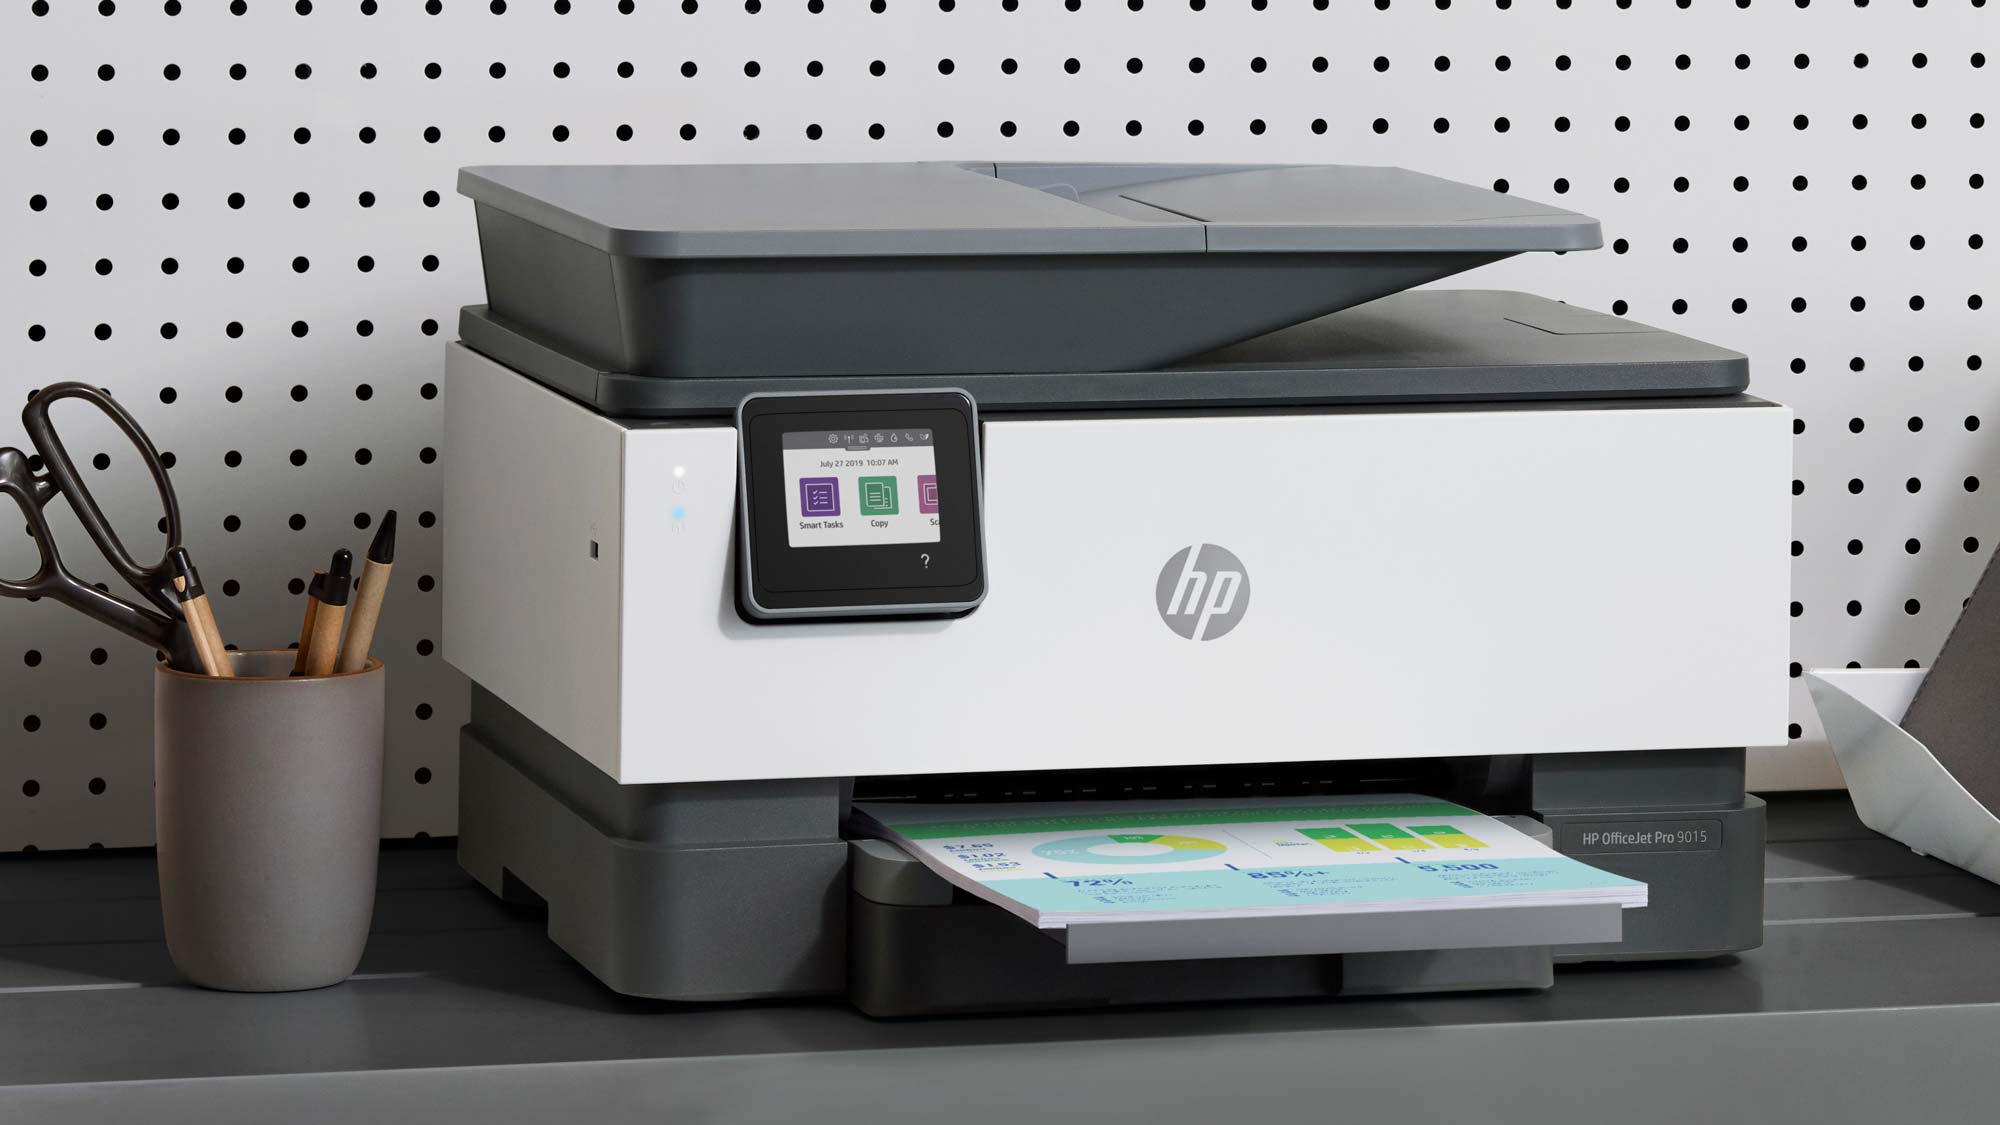 HP Printer | WINPROMY CONSULTANCY SDN BHD. (1065242-V) All Rights Reserved.